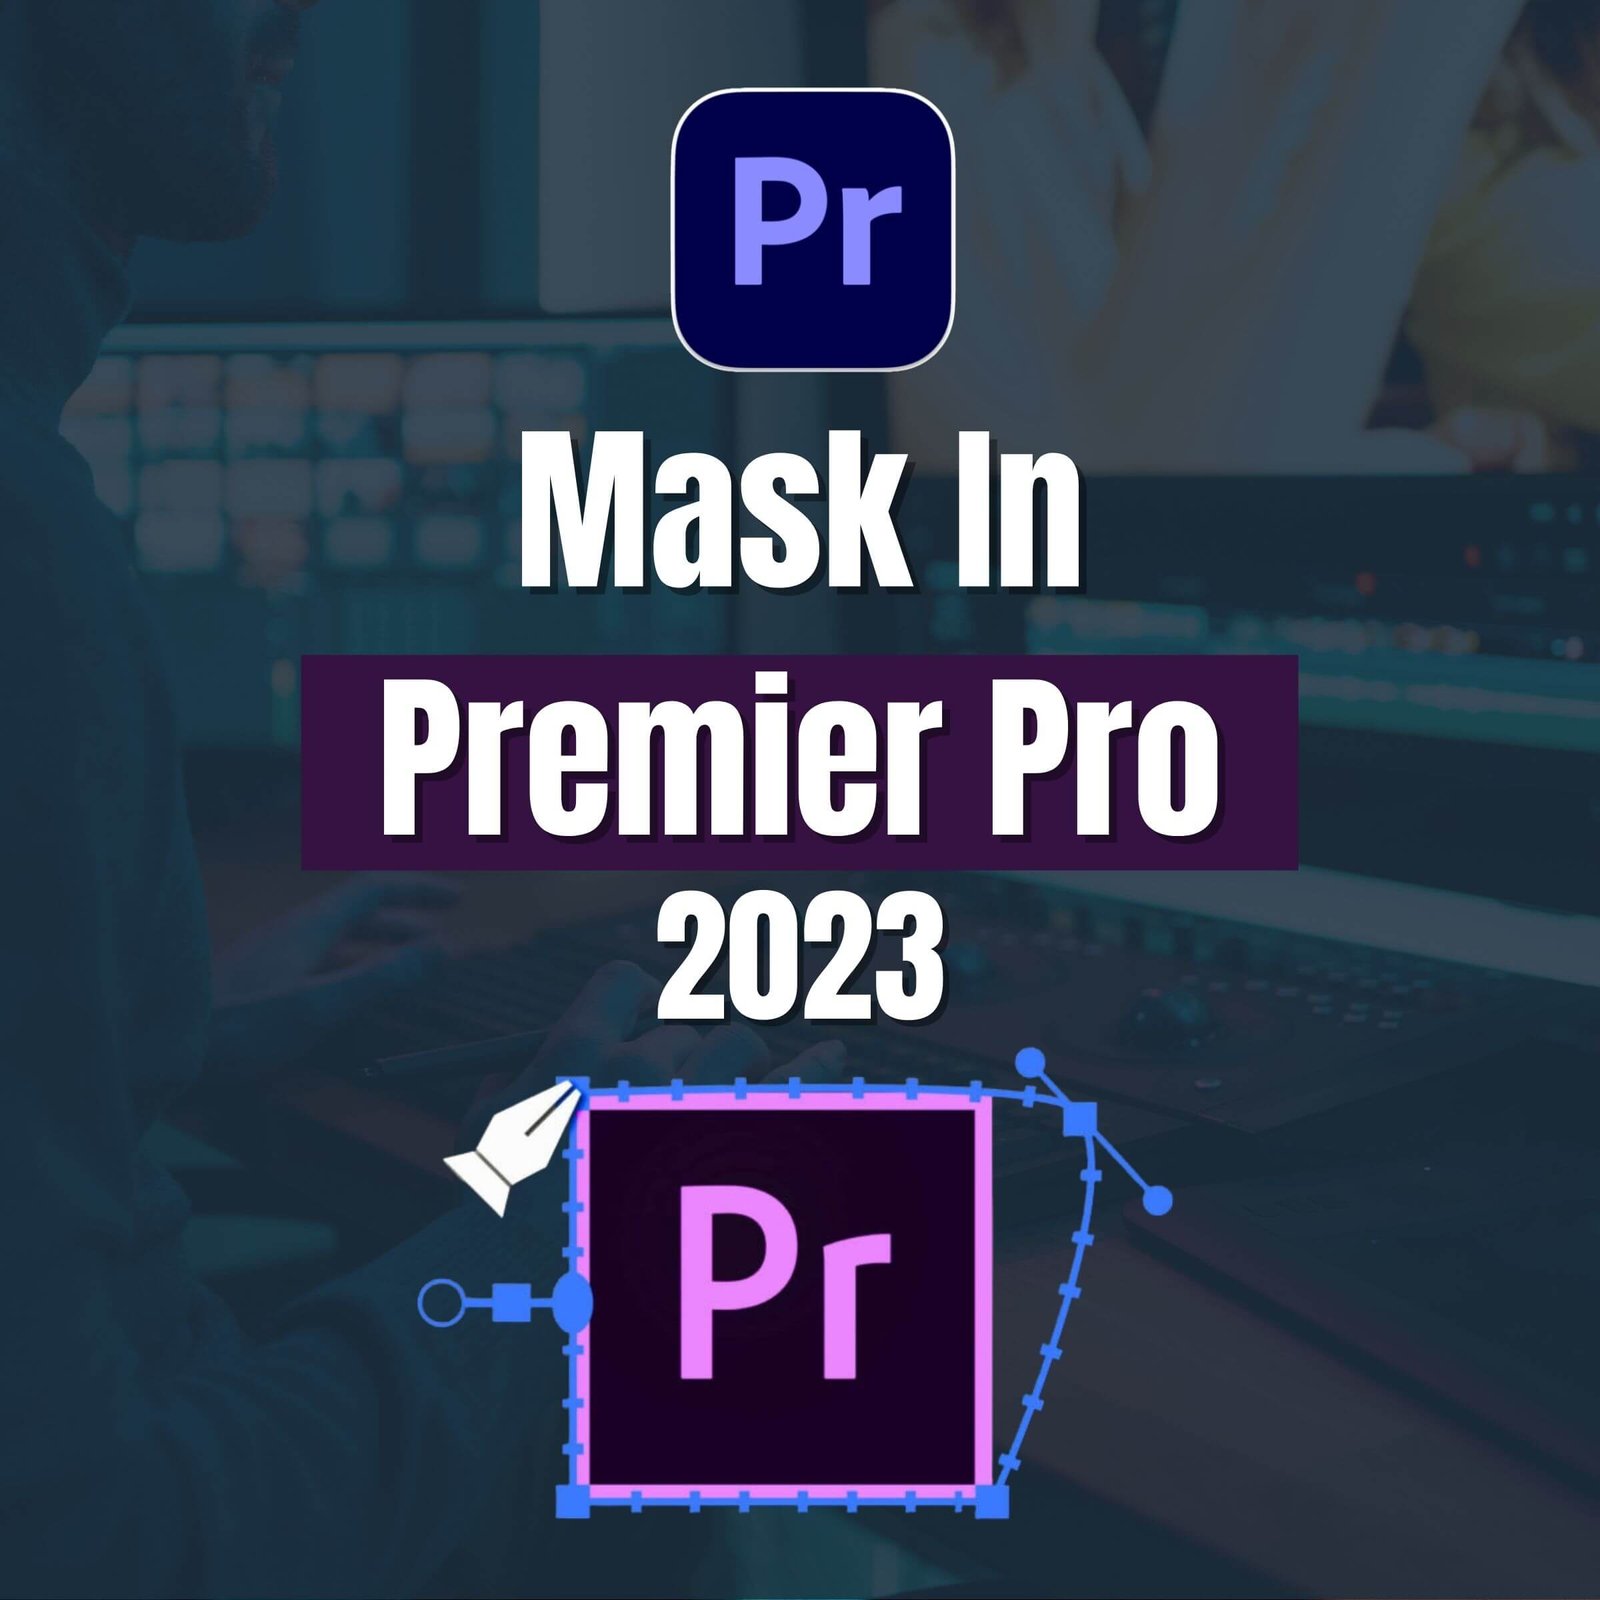 How to mask in premiere pro 2023 by snail motoin